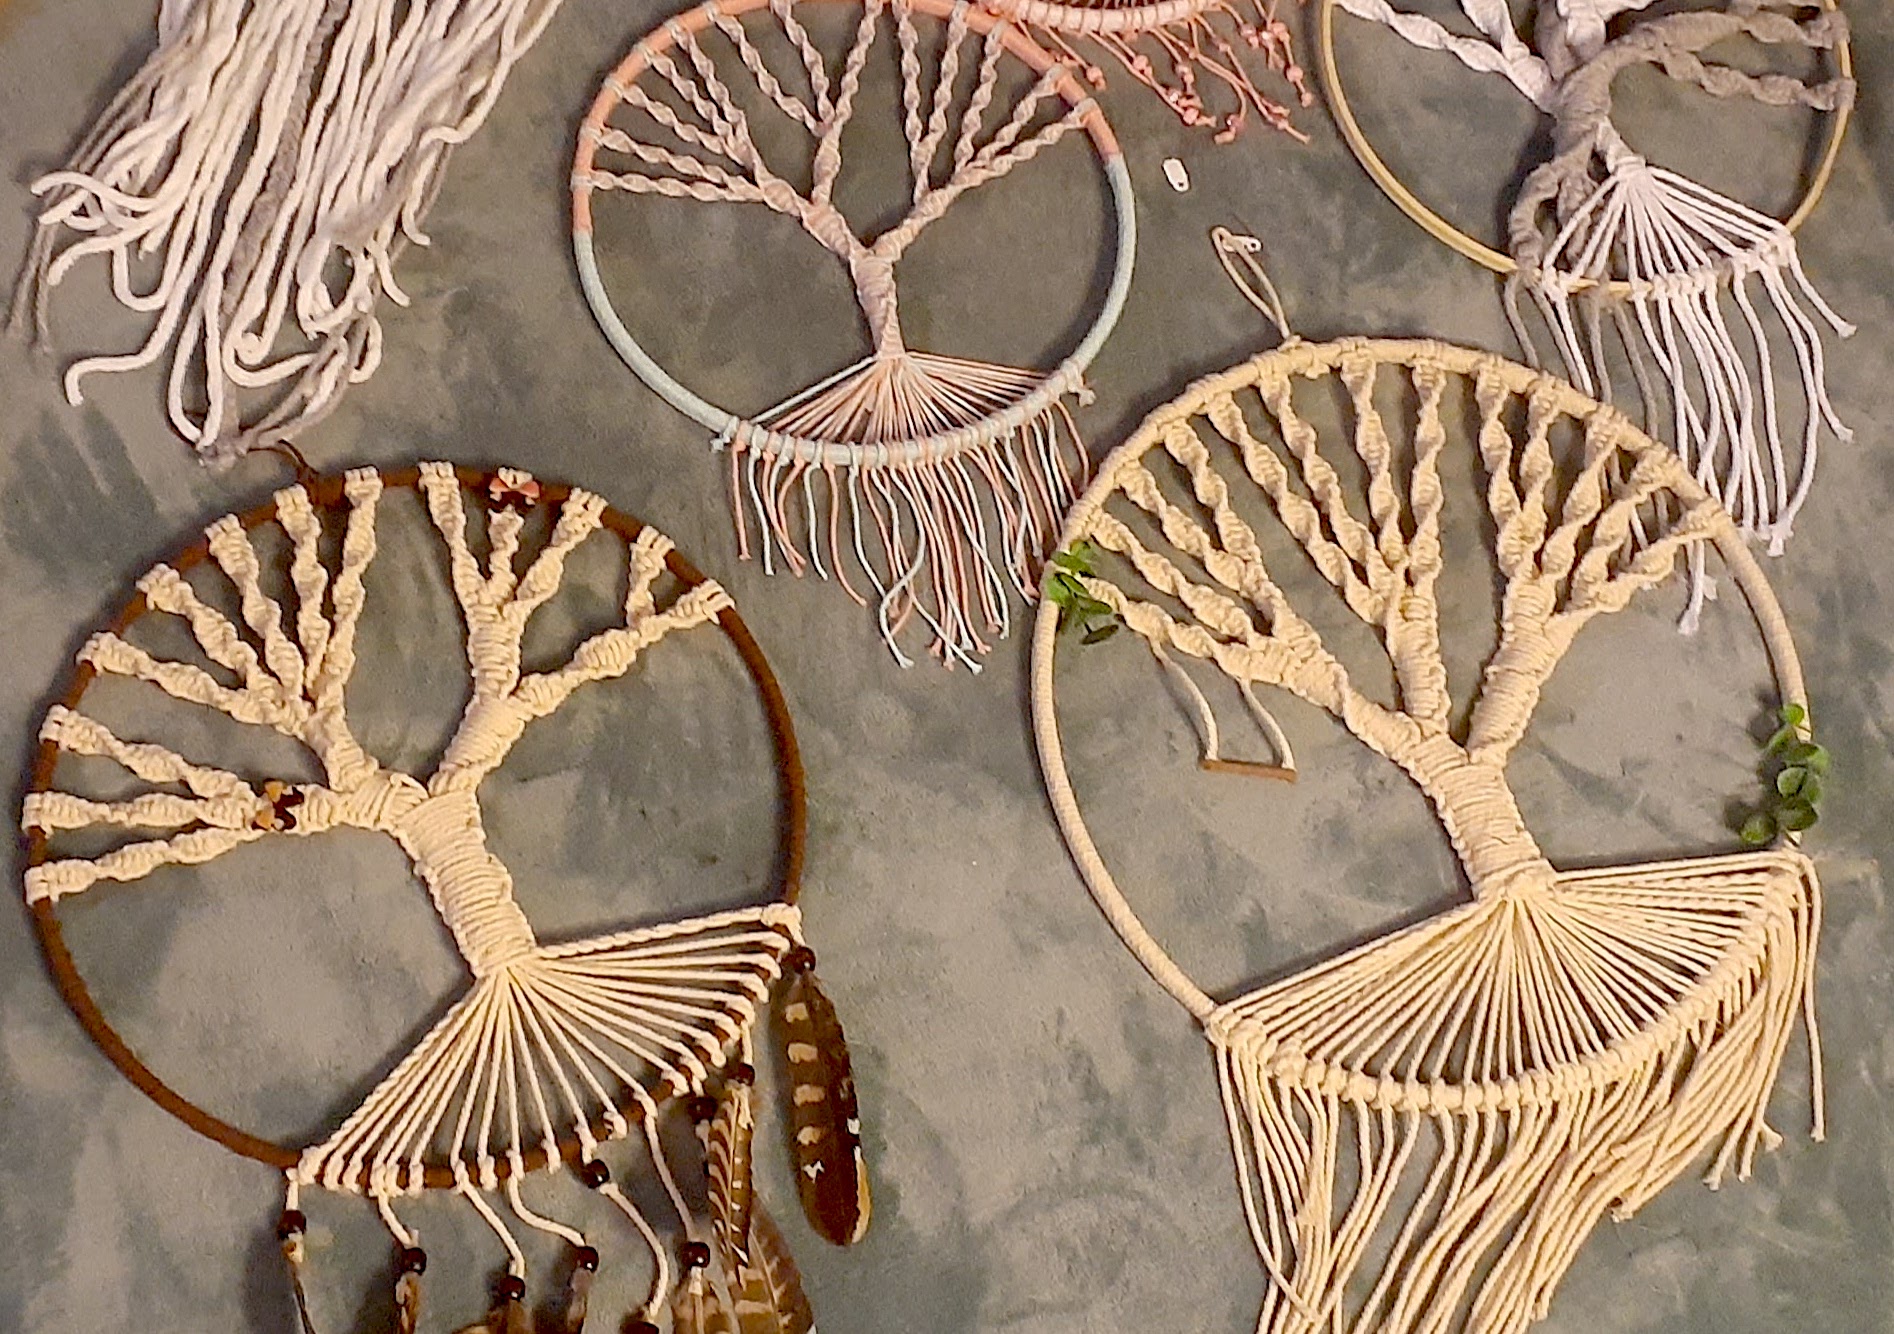 Macramé woven "Tree of Life" dream catchers made in Michigan by Crystal Green.